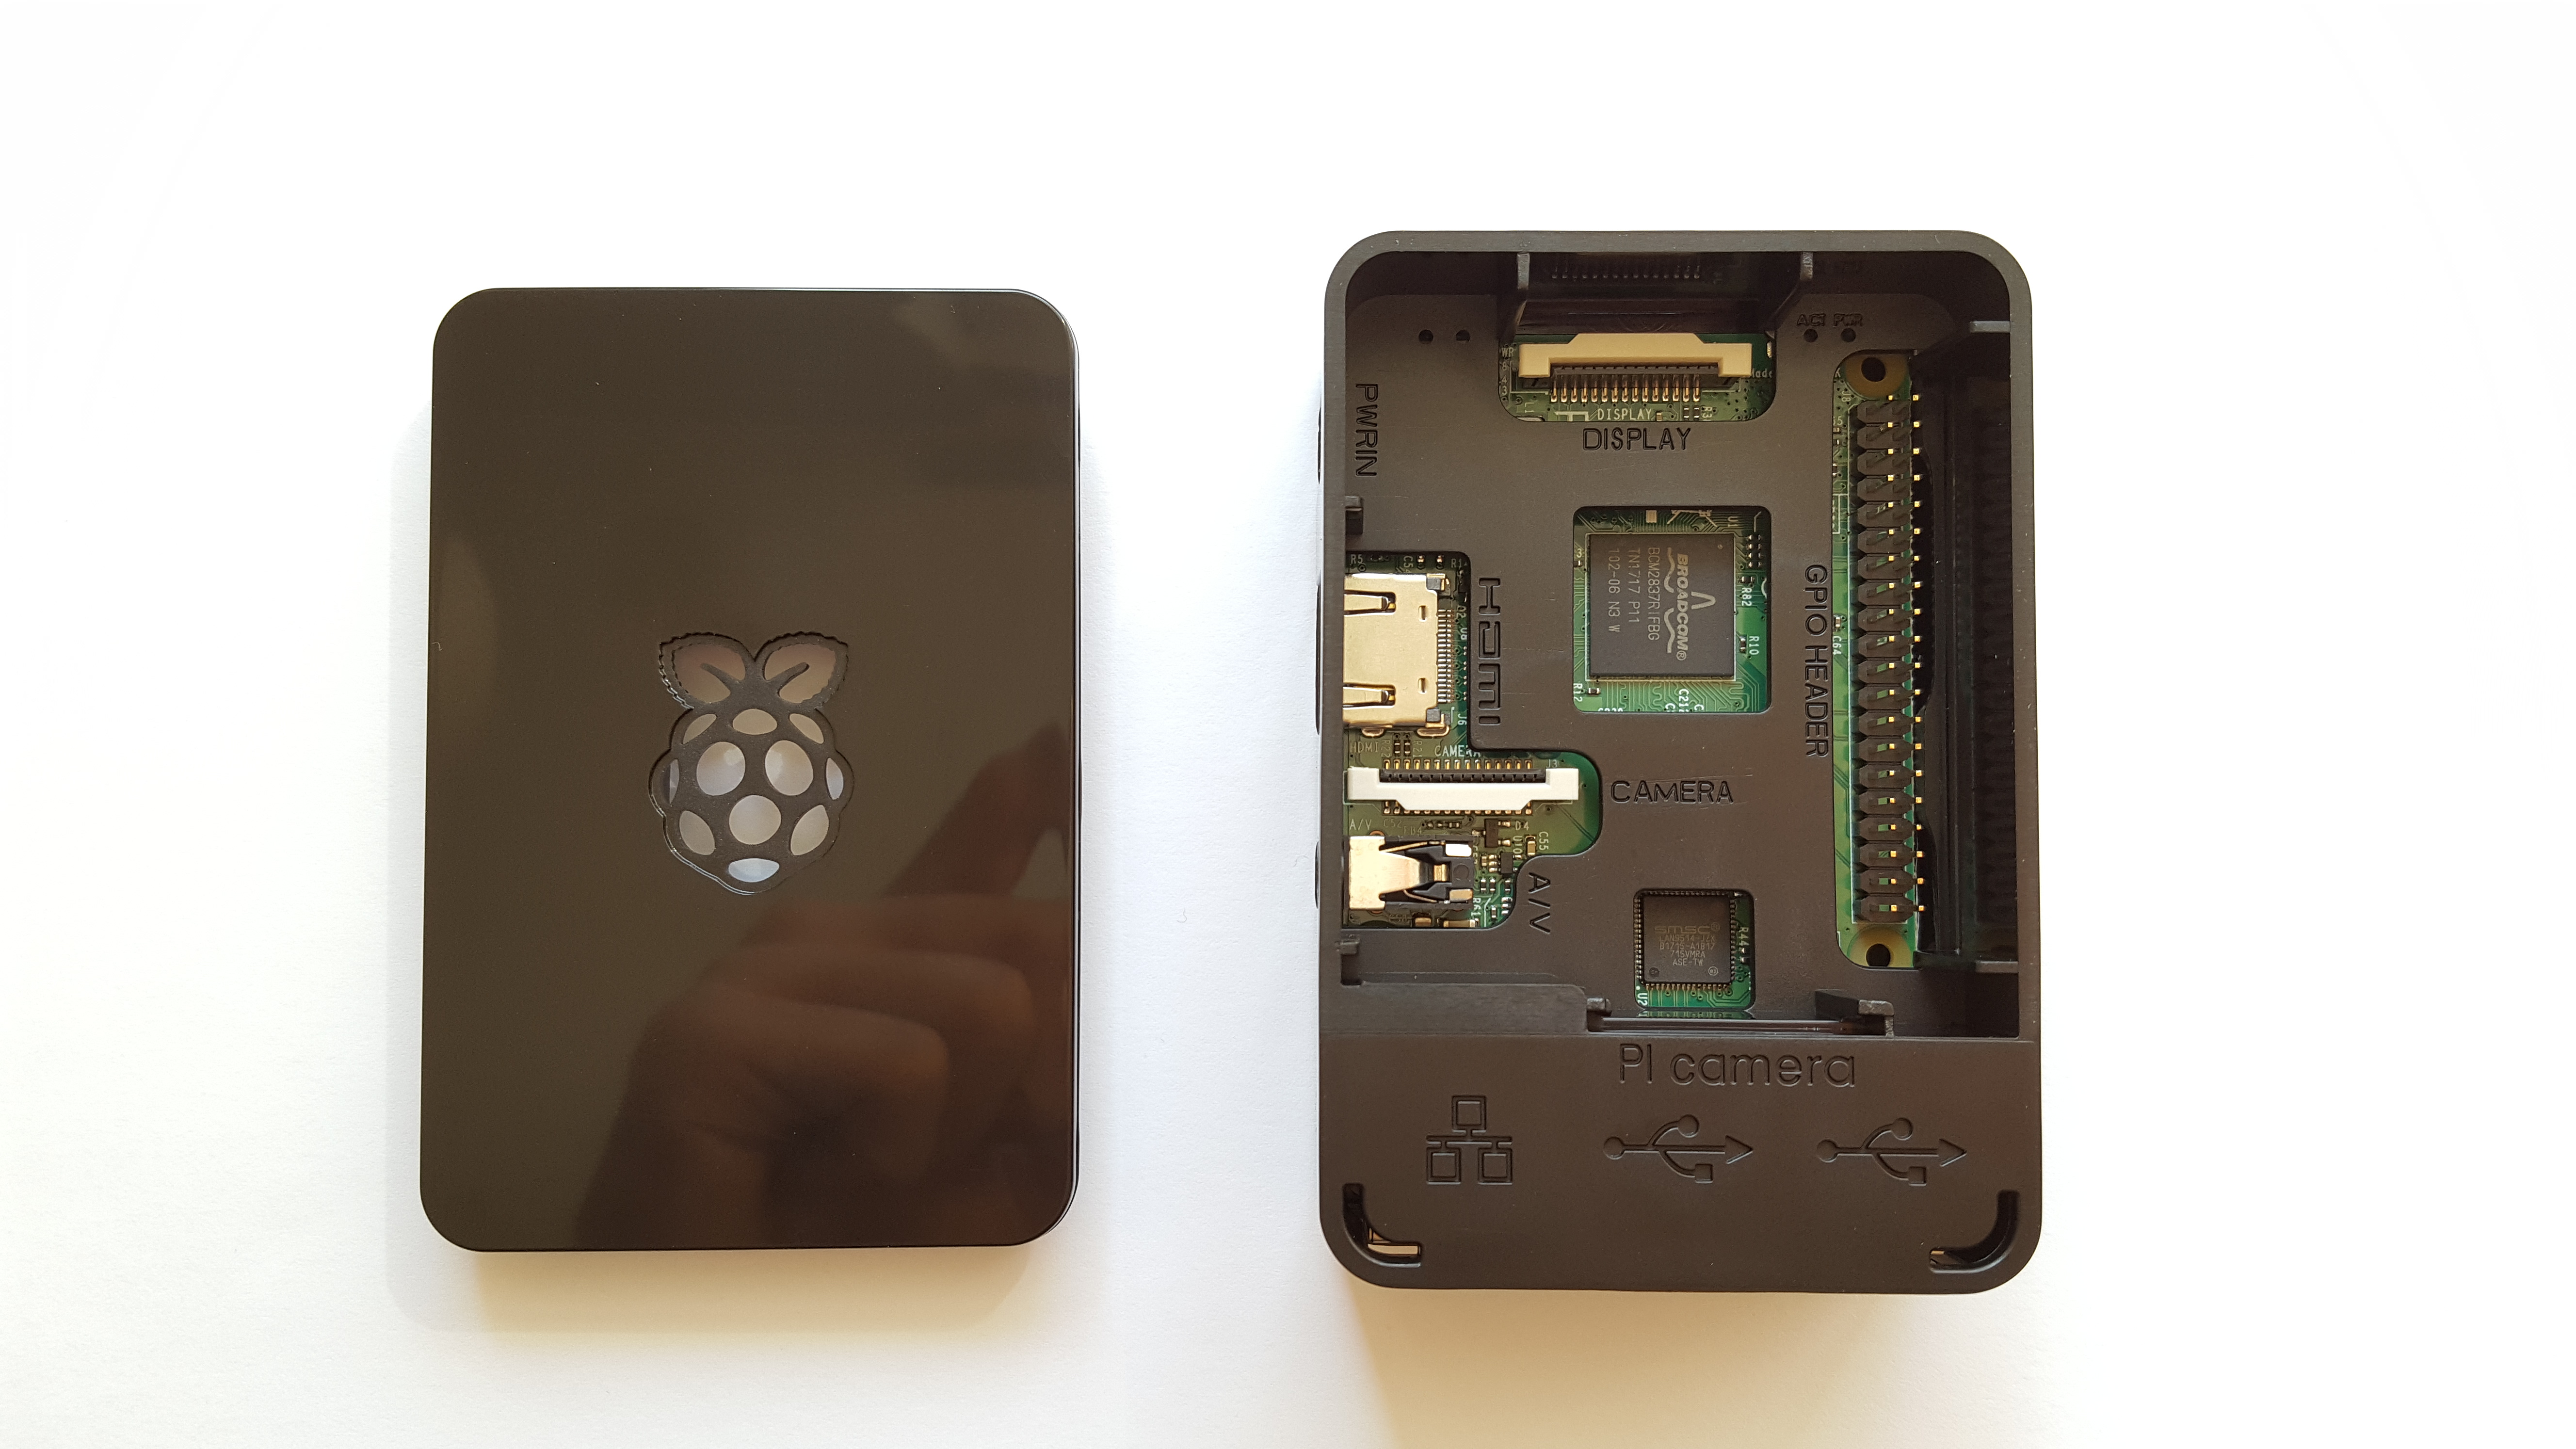 Case for the Raspberry Pi